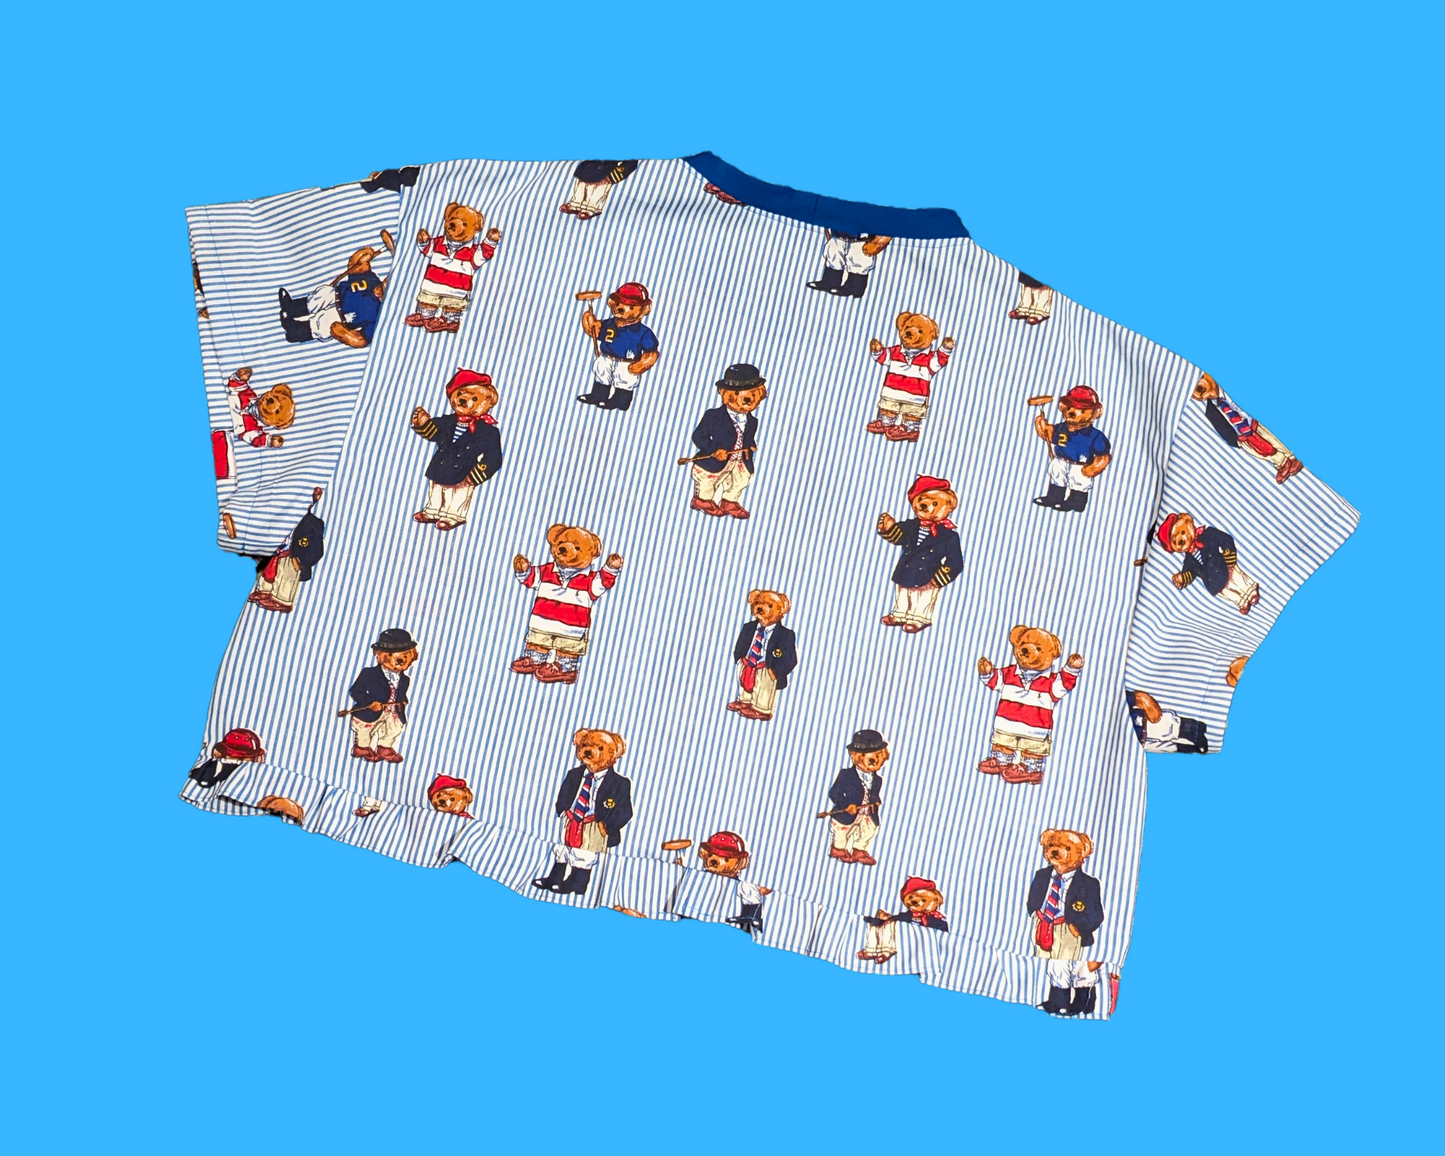 Handmade, Upcycled Little Bears Patterned, Ralph Lauren Bedsheet Crop Top Fits Size S to XL